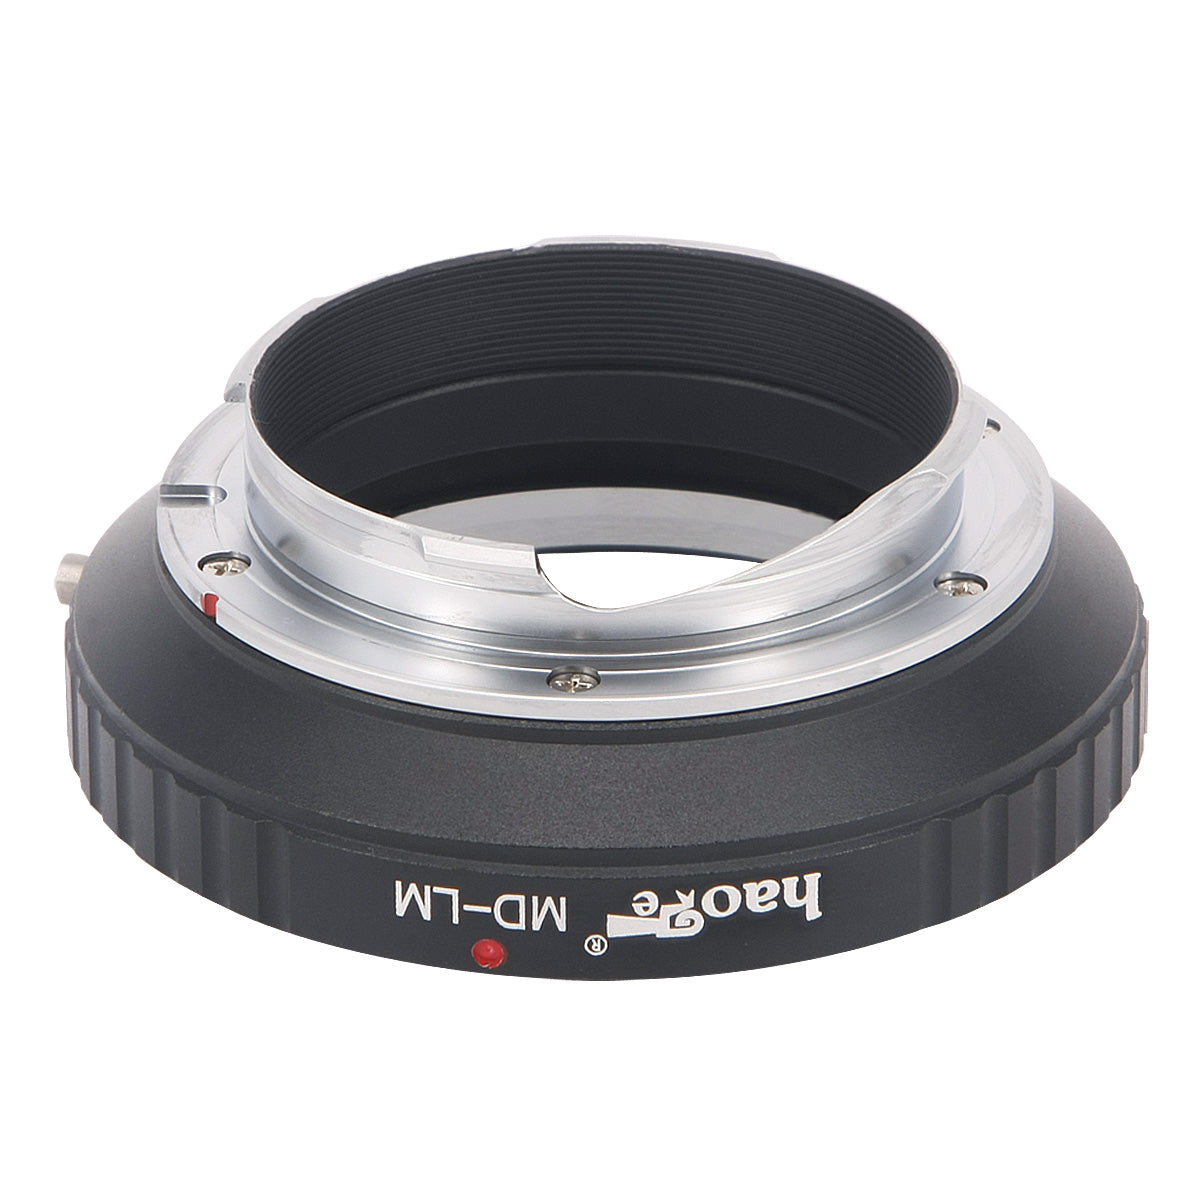 Haoge Lens Mount Adapter for Minolta MD mount Lens to Leica M-mount Camera such as M240, M240P, M262, M3, M2, M1, M4, M5, CL, M6, MP, M7, M8, M9, M9-P, M Monochrom, M-E, M, M-P, M10, M-A